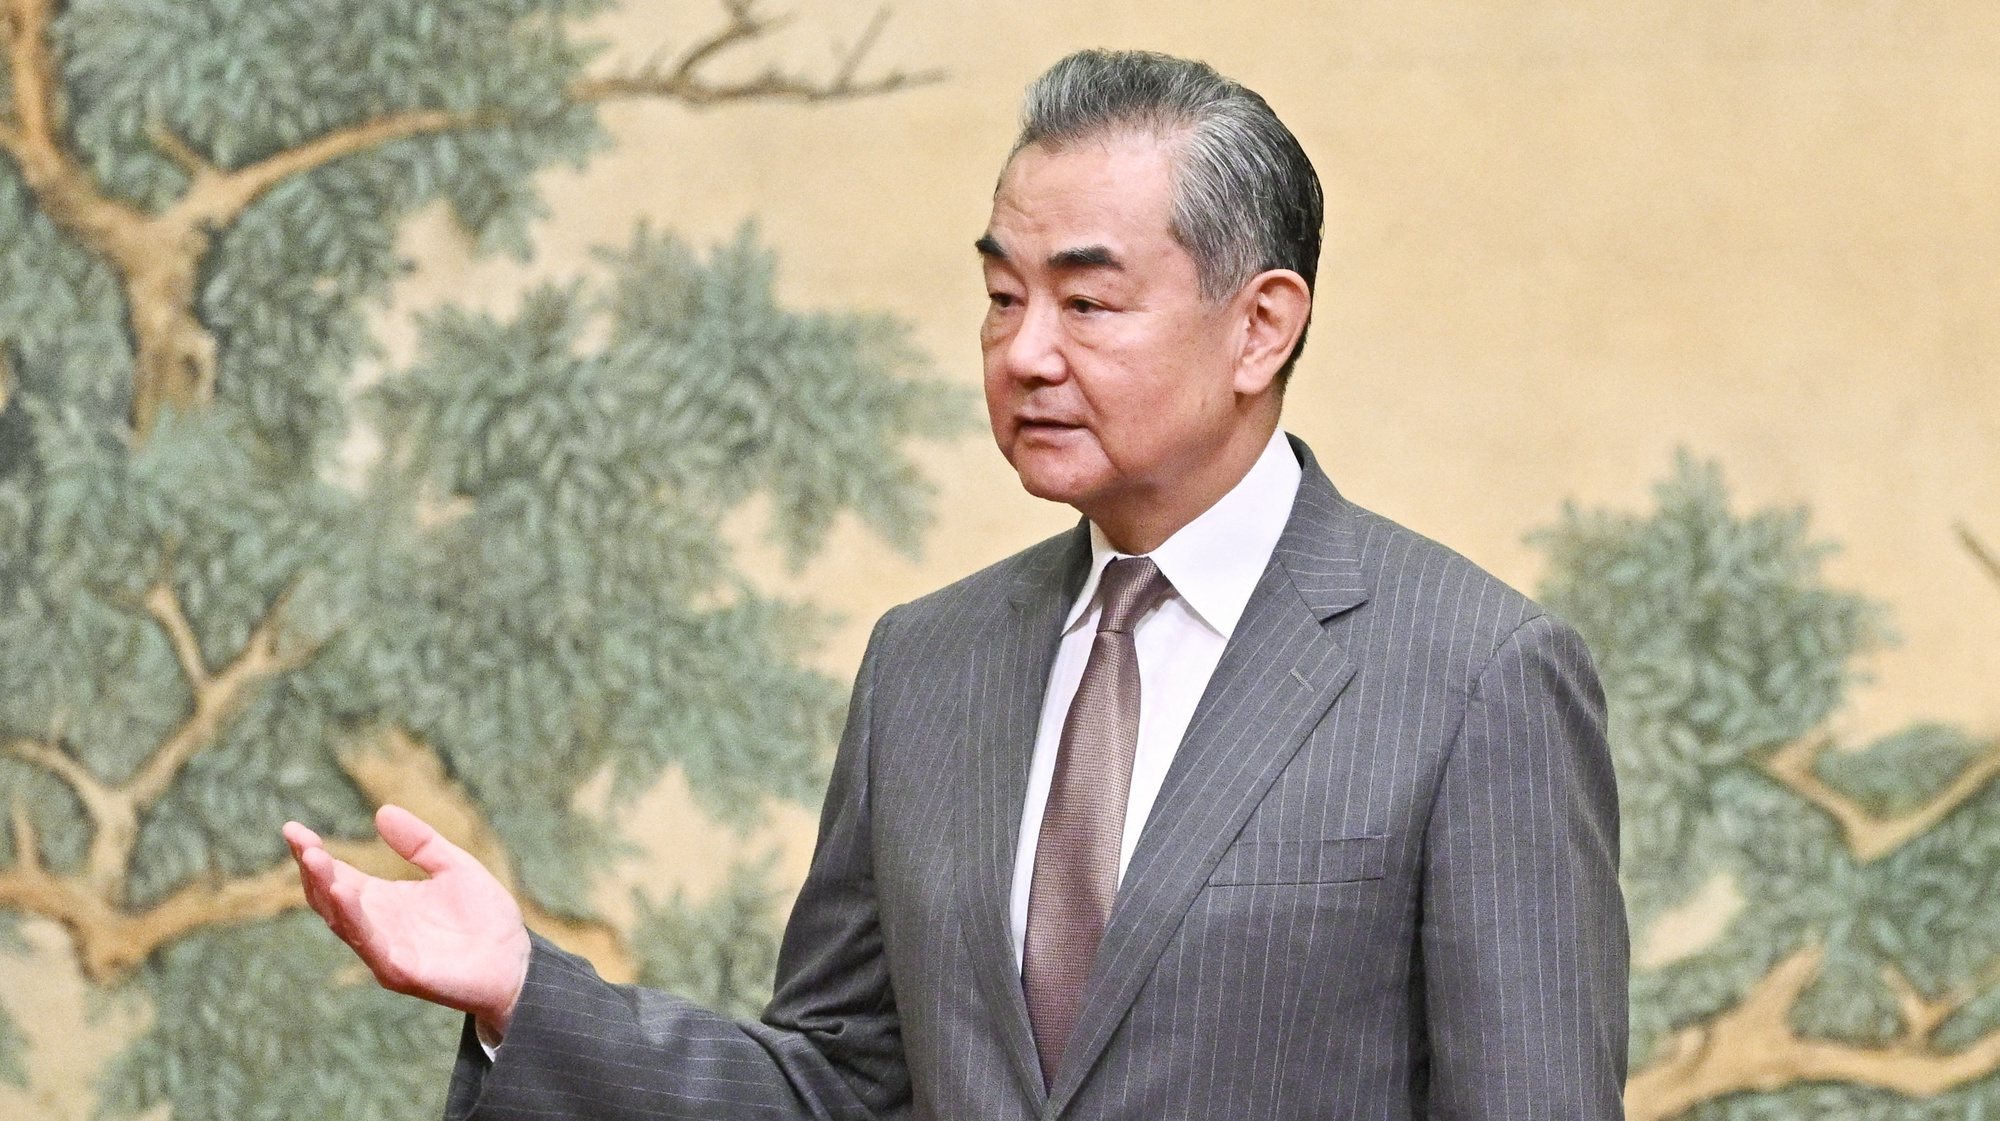 epa11492198 China&#039;s Foreign Minister Wang Yi gestures during an event hosting the vice chairman of the Central Committee of Palestinian organization and political party Fatah and the senior member of the Palestinian Islamist movement Hamas, at the Diaoyutai State Guesthouse in Beijing, China, 23 July 2024. China&#039;s Foreign Minister Wang Yi on 23 July hailed an agreement by 14 Palestinian groups to set up an &#039;interim national reconciliation government&#039; to govern Gaza when the ongoing conflict is over. Palestinian groups including Hamas and Fatah met in Beijing this week in a renewed bid for reconciliation.  EPA/PEDRO PARDO / POOL